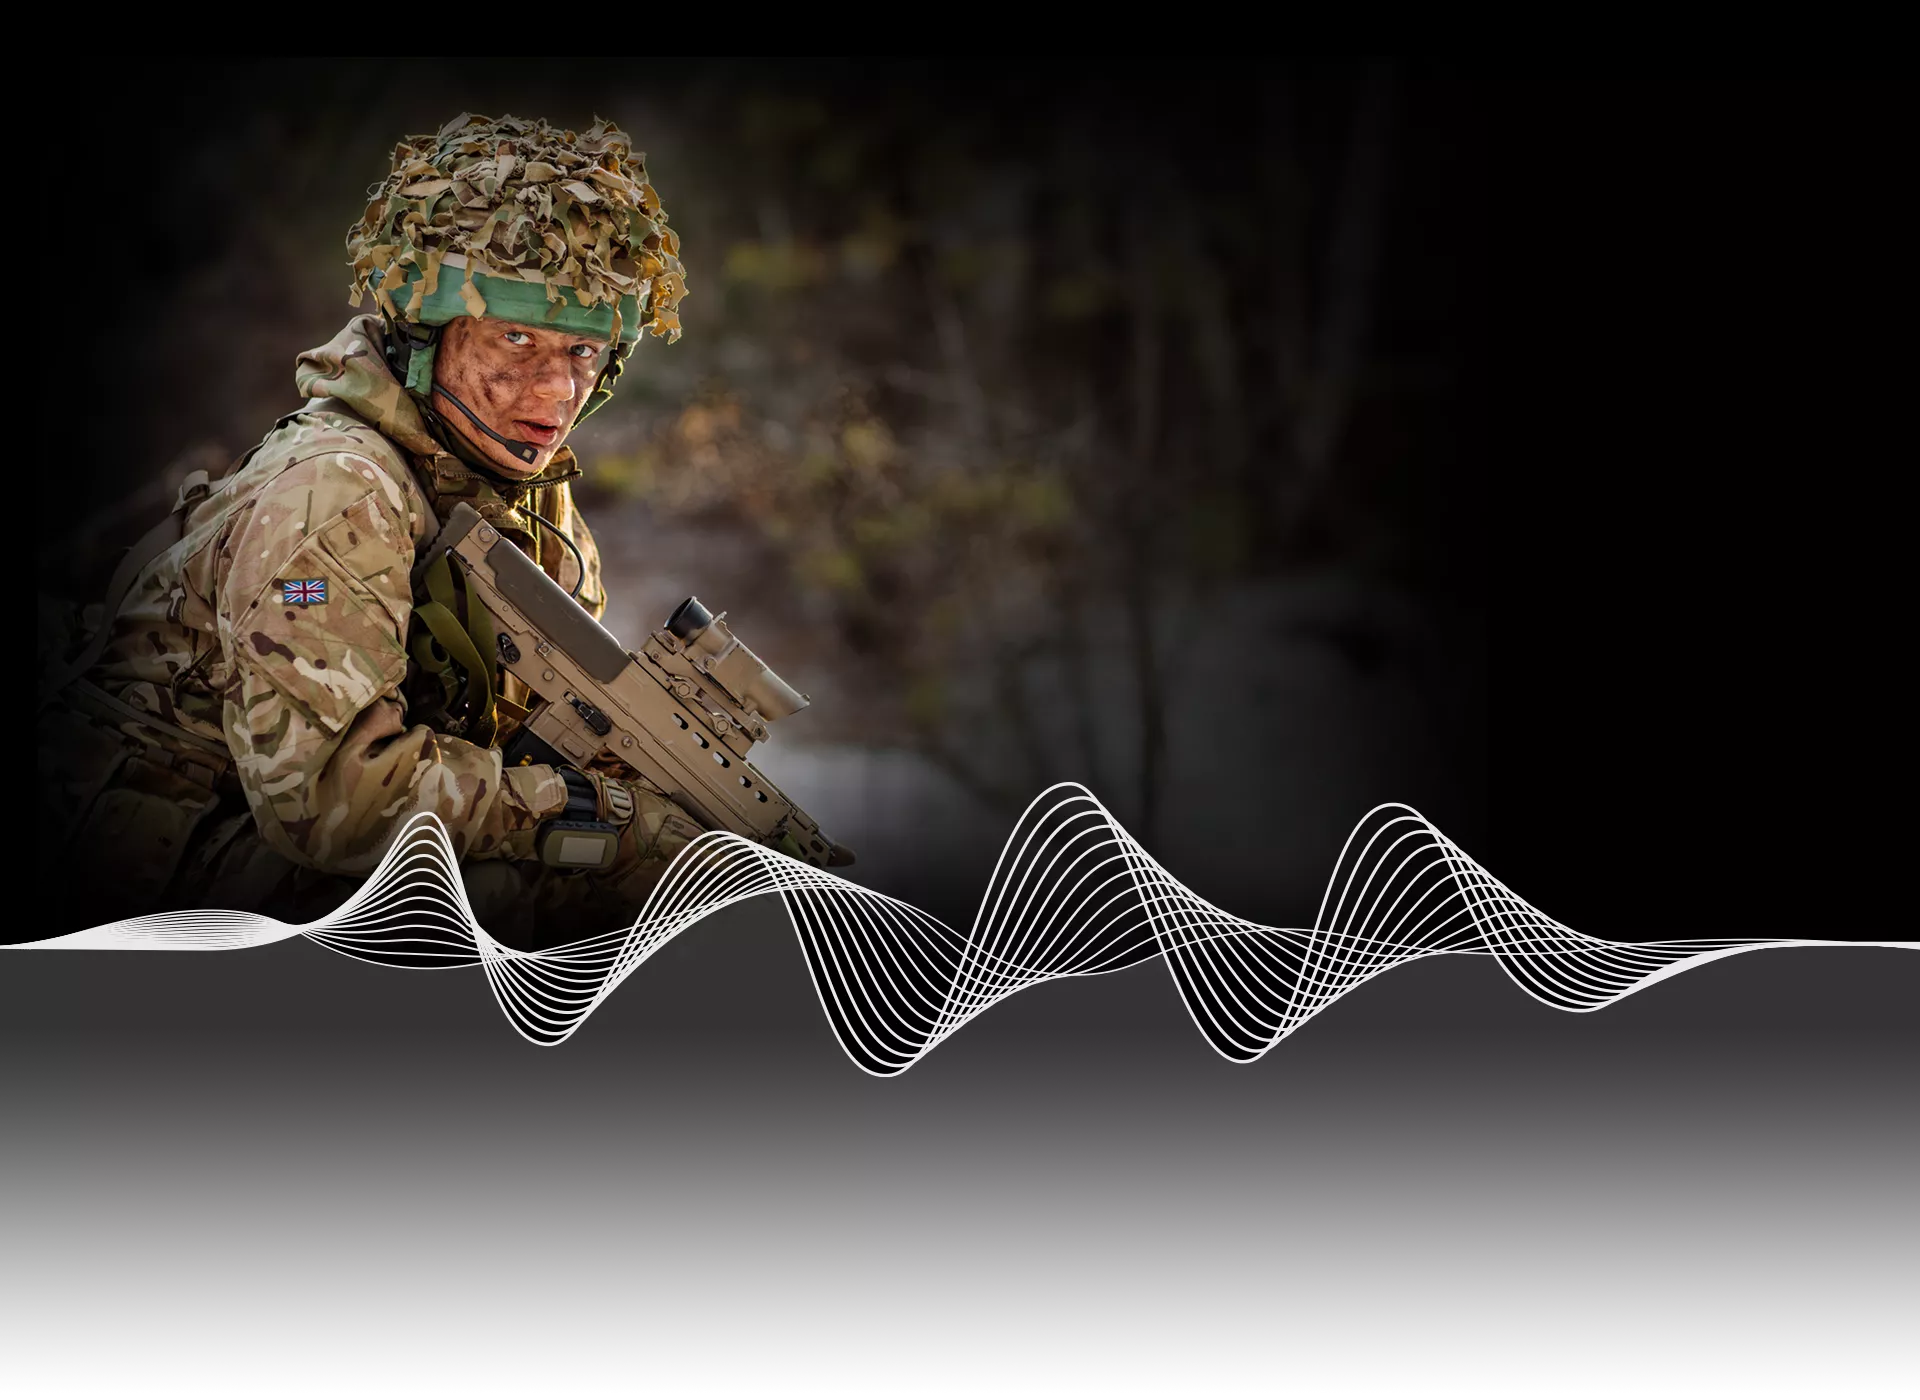 British Soldier looking at the camera with RF radio wave in the foreground